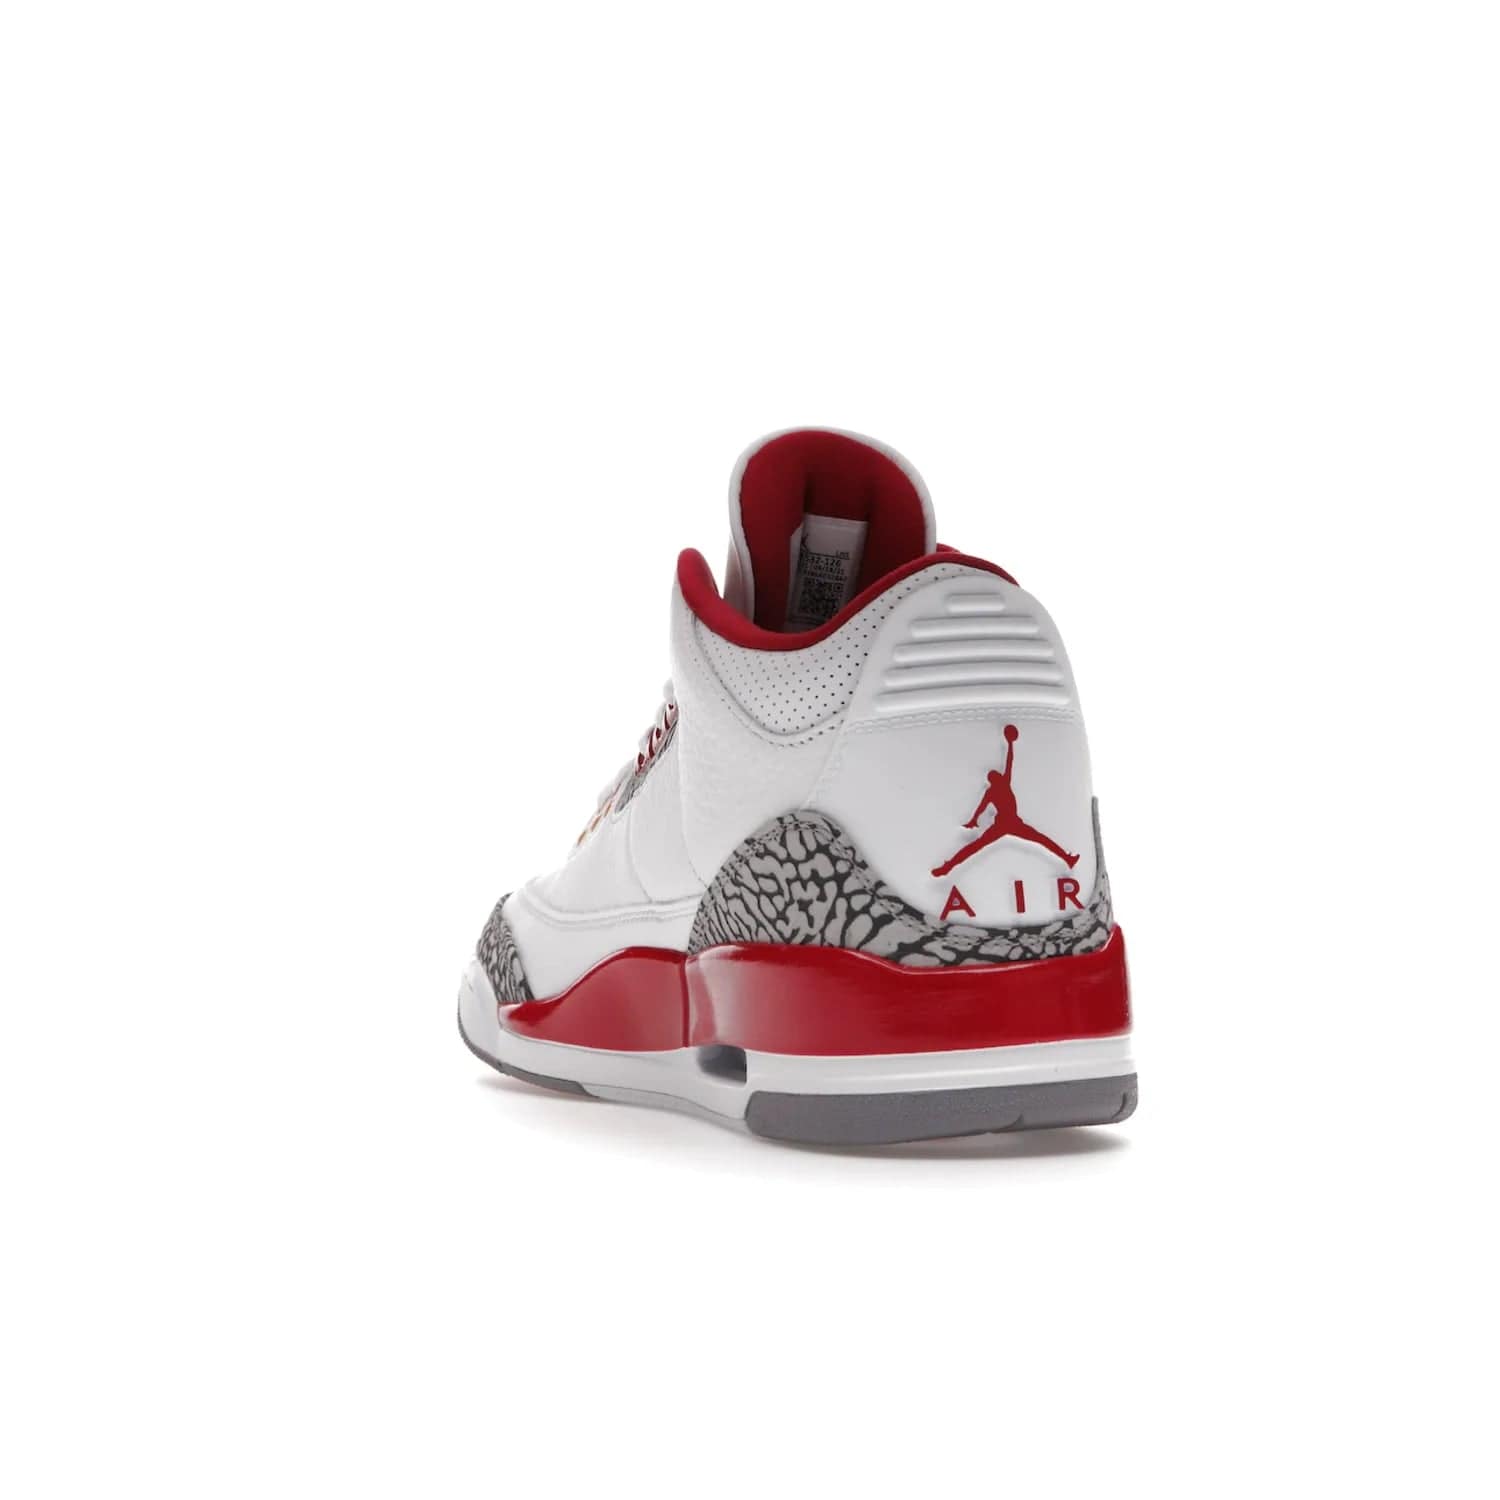 Jordan 3 Retro Cardinal Red - Image 26 - Only at www.BallersClubKickz.com - Air Jordan 3 Retro Cardinal Red combines classic style and modern appeal - white tumbled leather, signature Elephant Print overlays, cardinal red midsoles, Jumpman logo embroidery. Available Feb 2022.